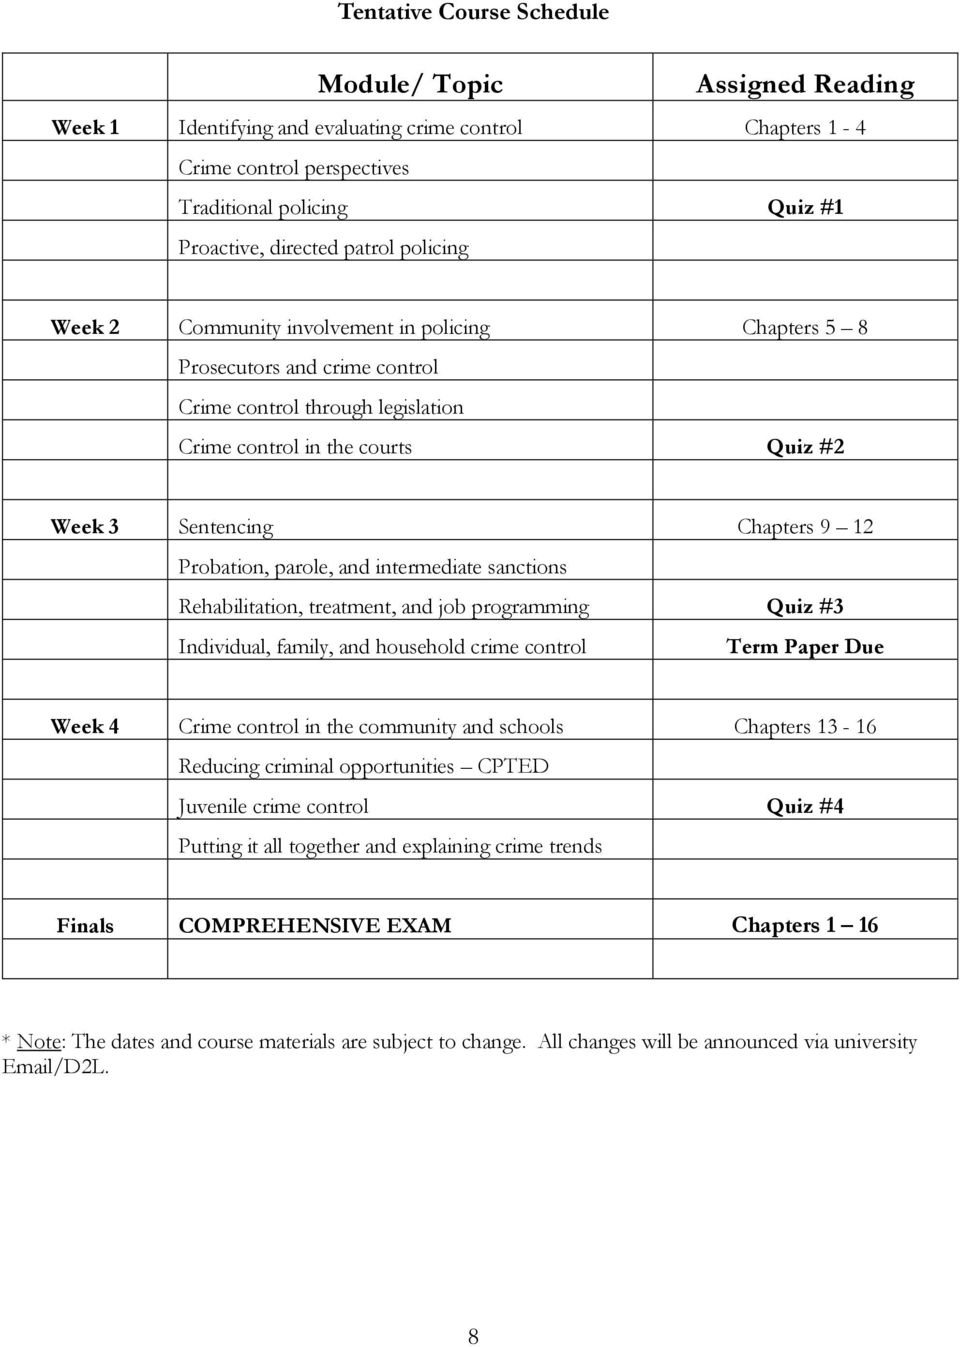 12 Probation, parole, and intermediate sanctions Rehabilitation, treatment, and job programming Quiz #3 Individual, family, and household crime control Term Paper Due Week 4 Crime control in the